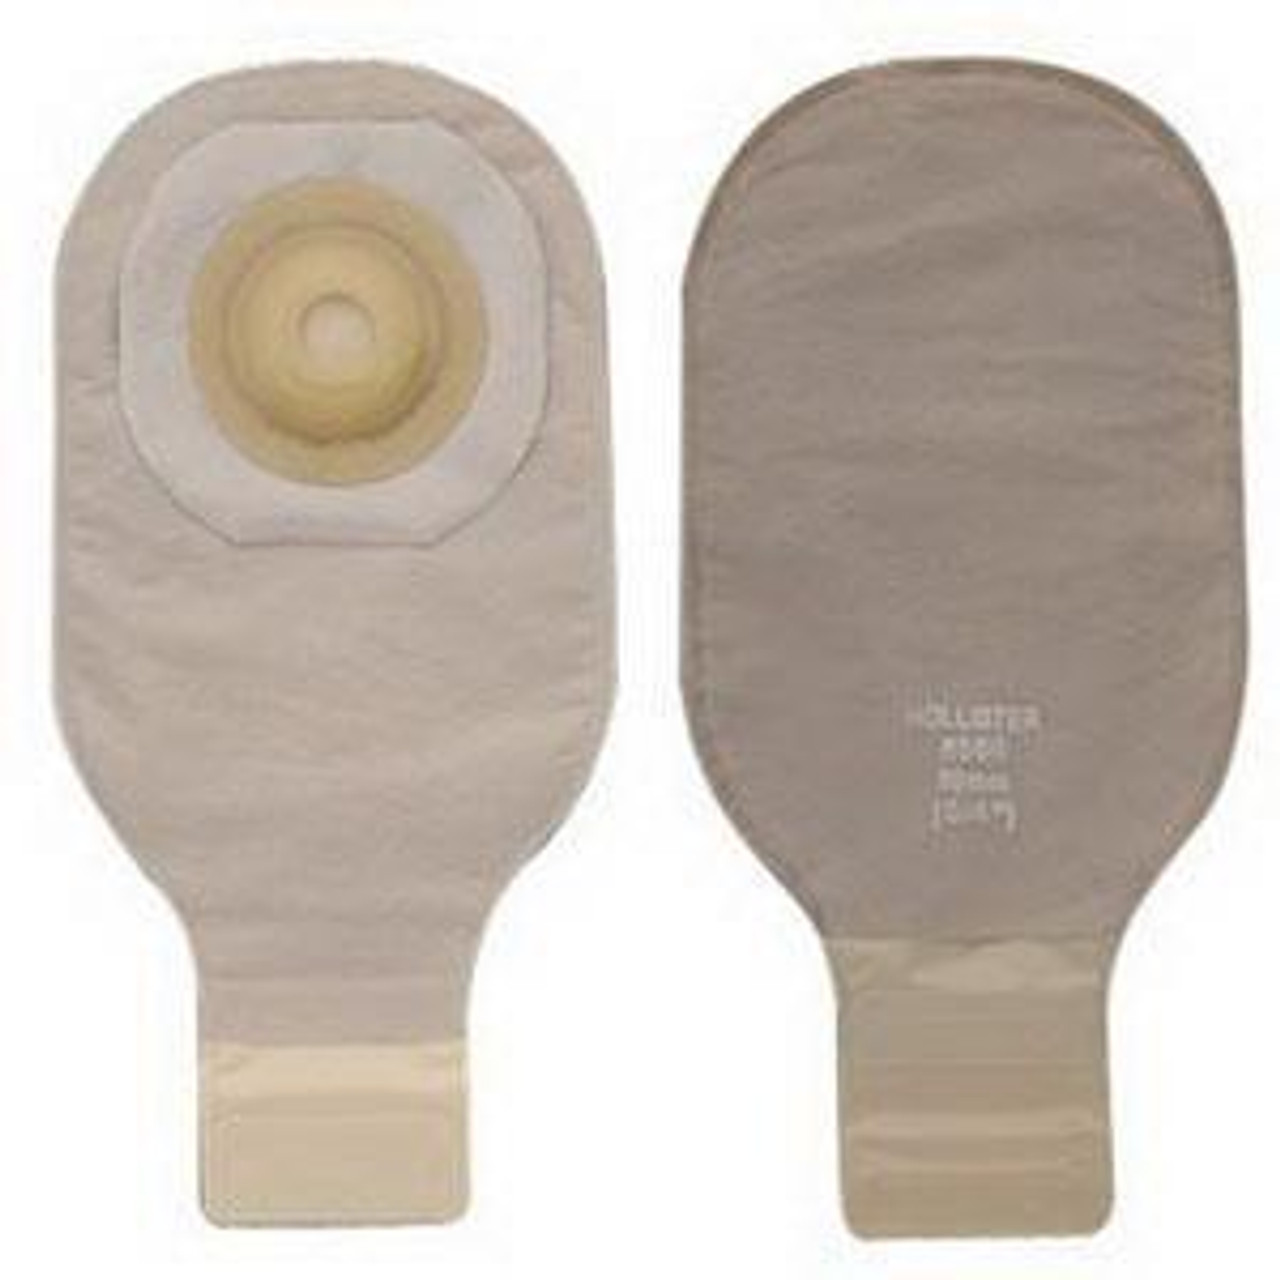 CONVEX Drainable Pouch, Pre-sized 1", BEIGE, LOCK-N-ROLL BX/5 (HOL-8592) (Hollister 8592)